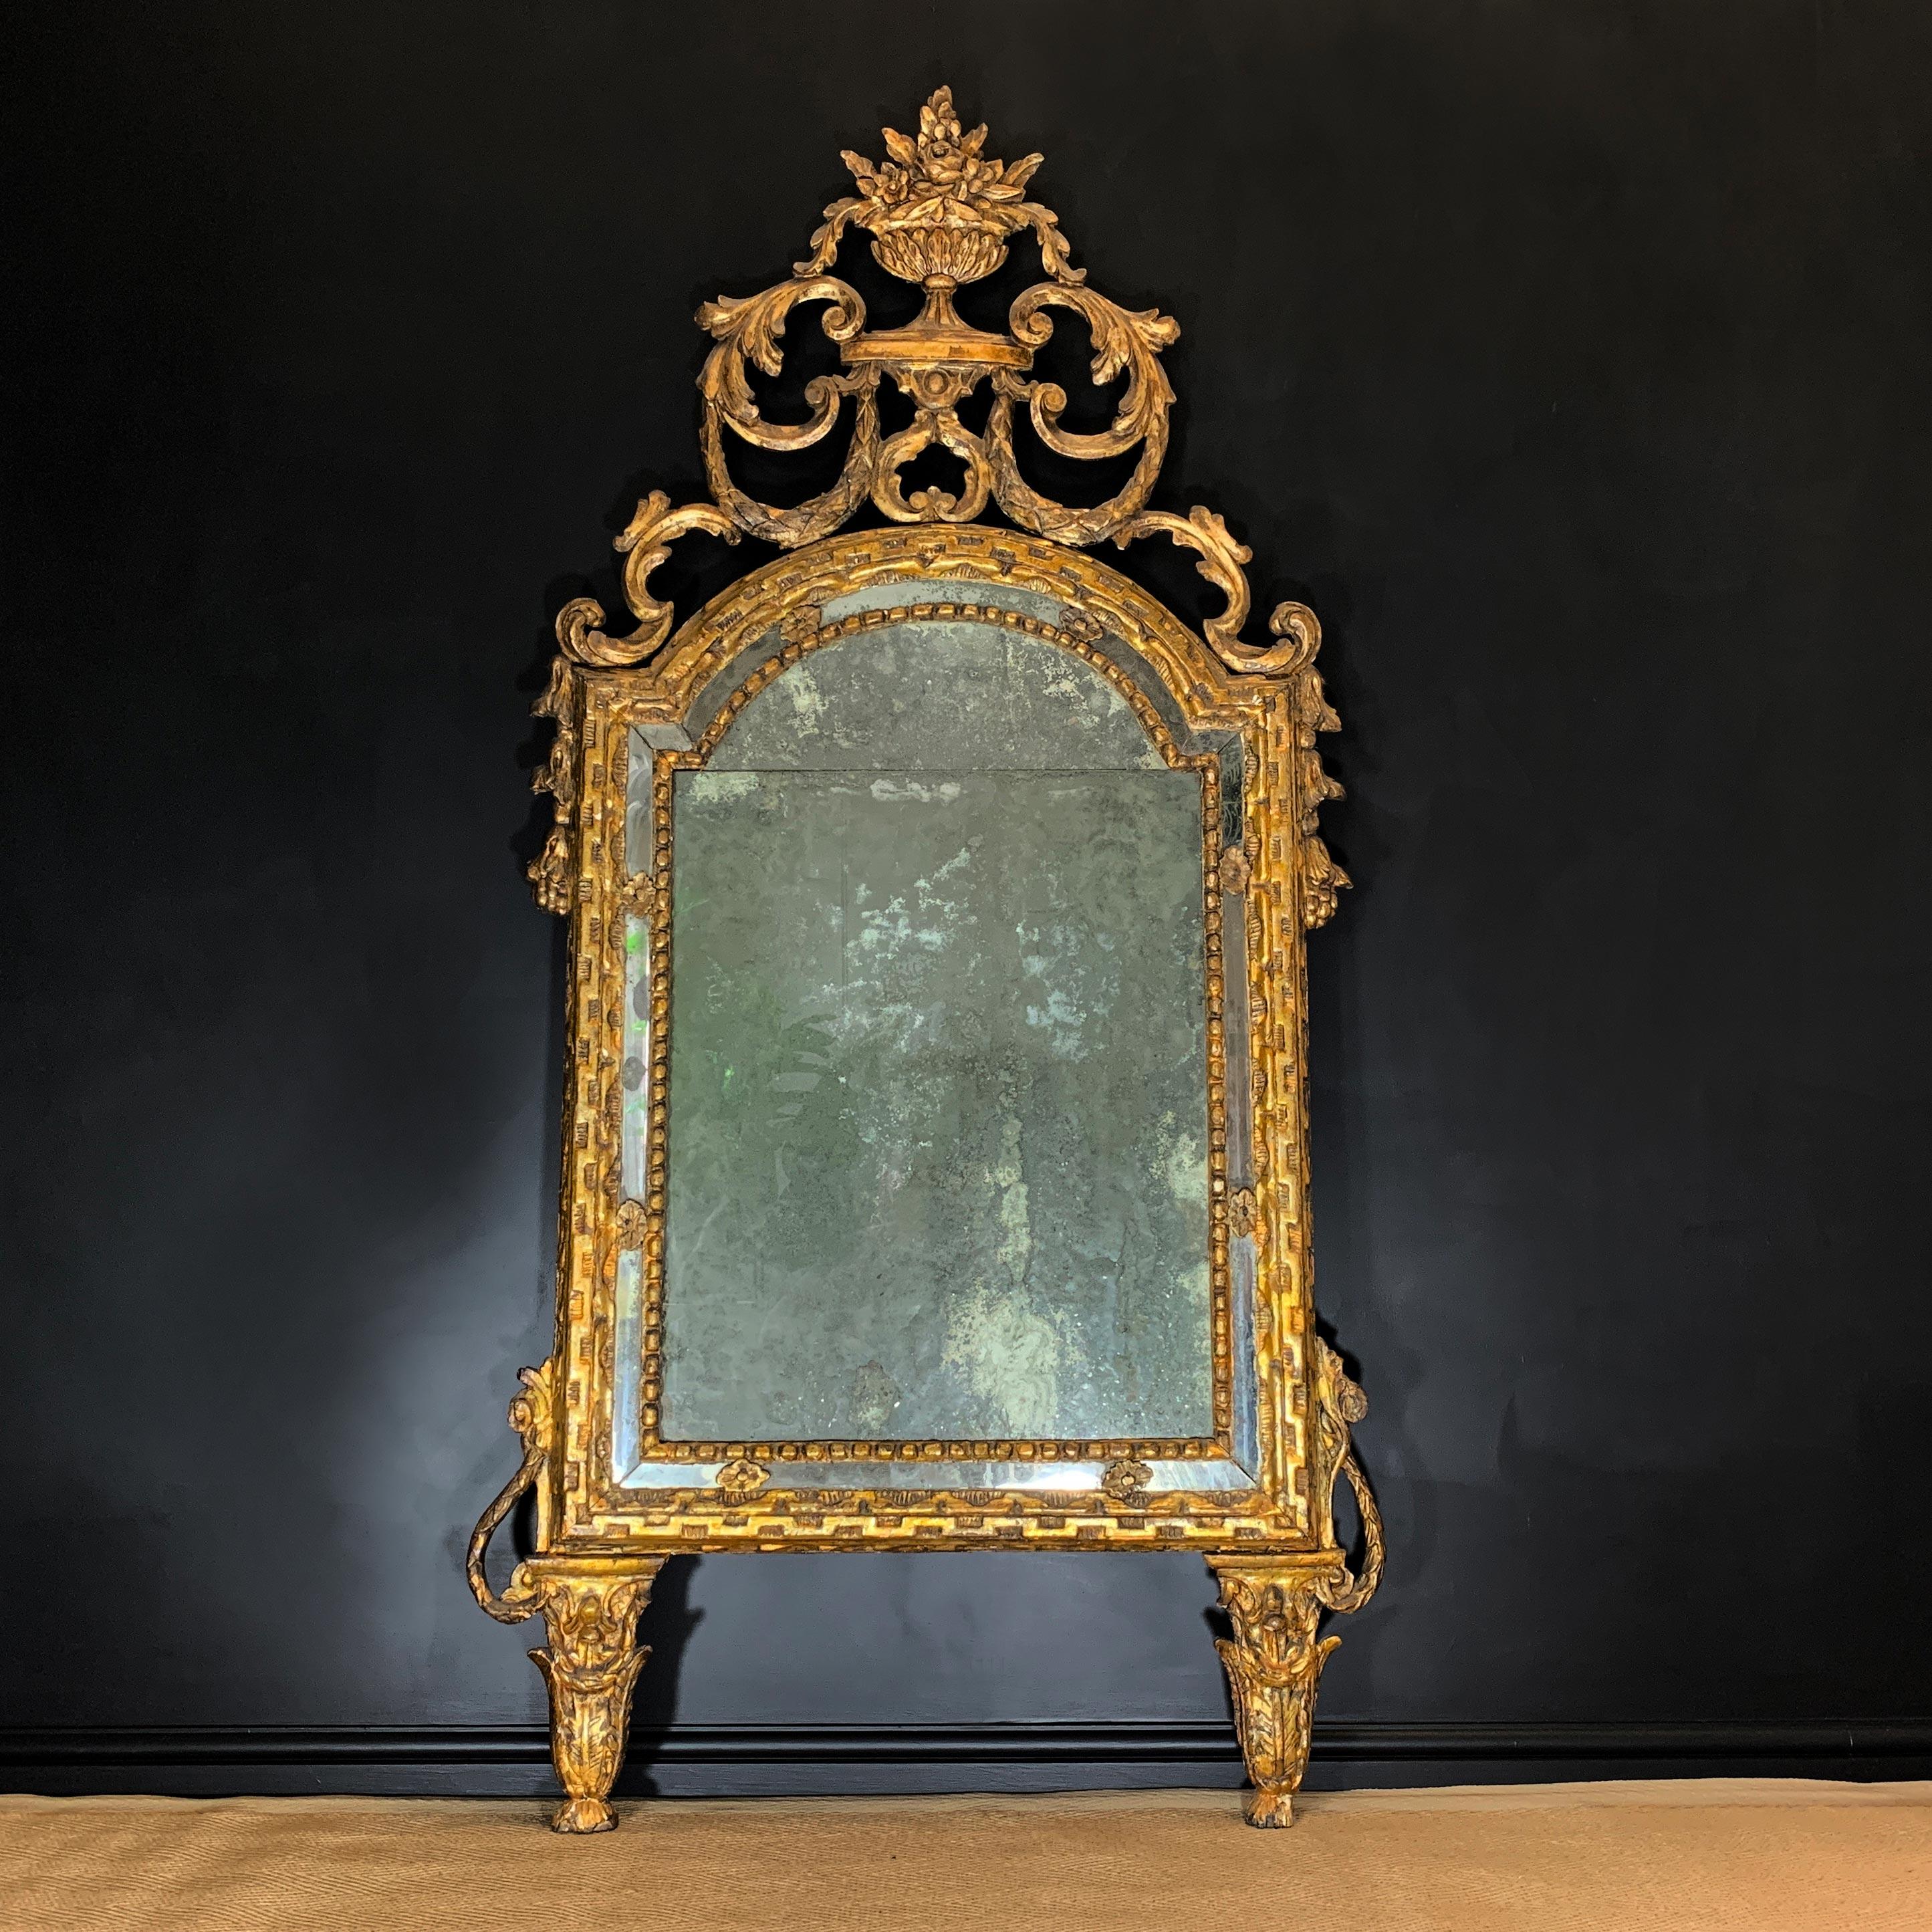 An exceptional split plate Italian mirror

Dating to circa 1730, Genoa, Italy.

This astonishing mirror is of exceptional proportions, the split mercury plate foxed and worn to perfection over the centuries, adorned with the most beautiful gilt